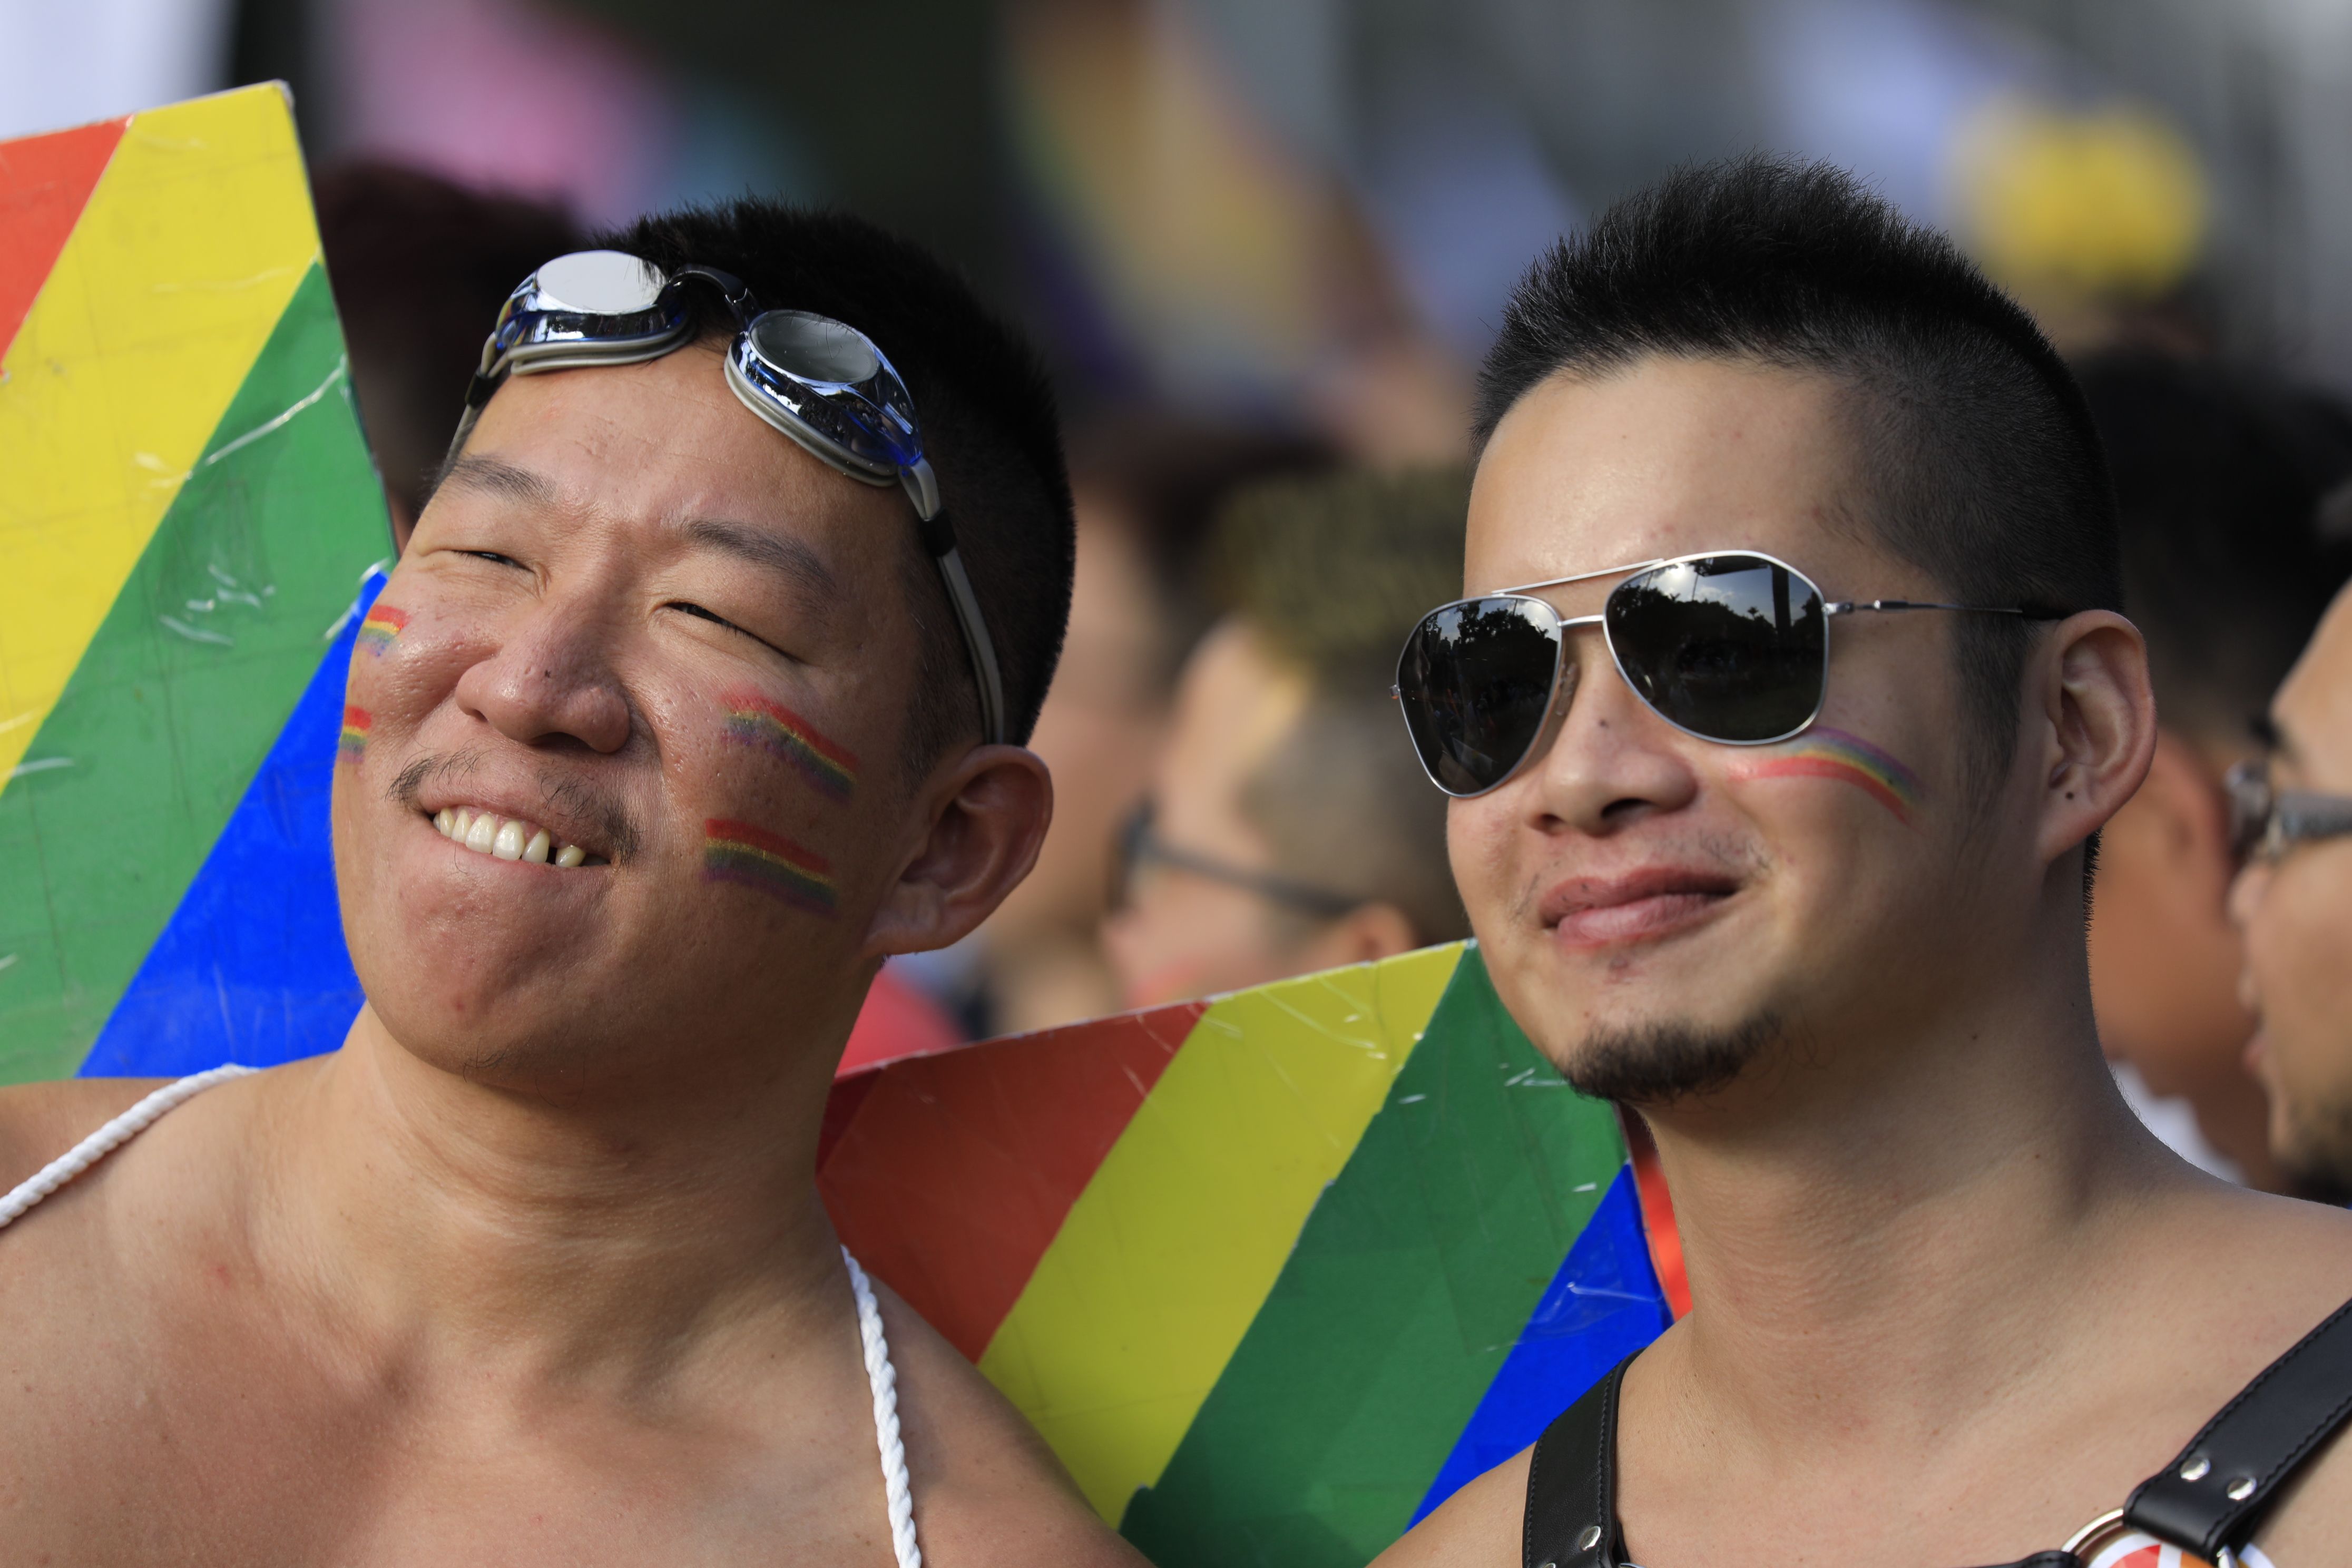 Taiwan becomes first Asian country to create same-sex marriage bill PinkNews